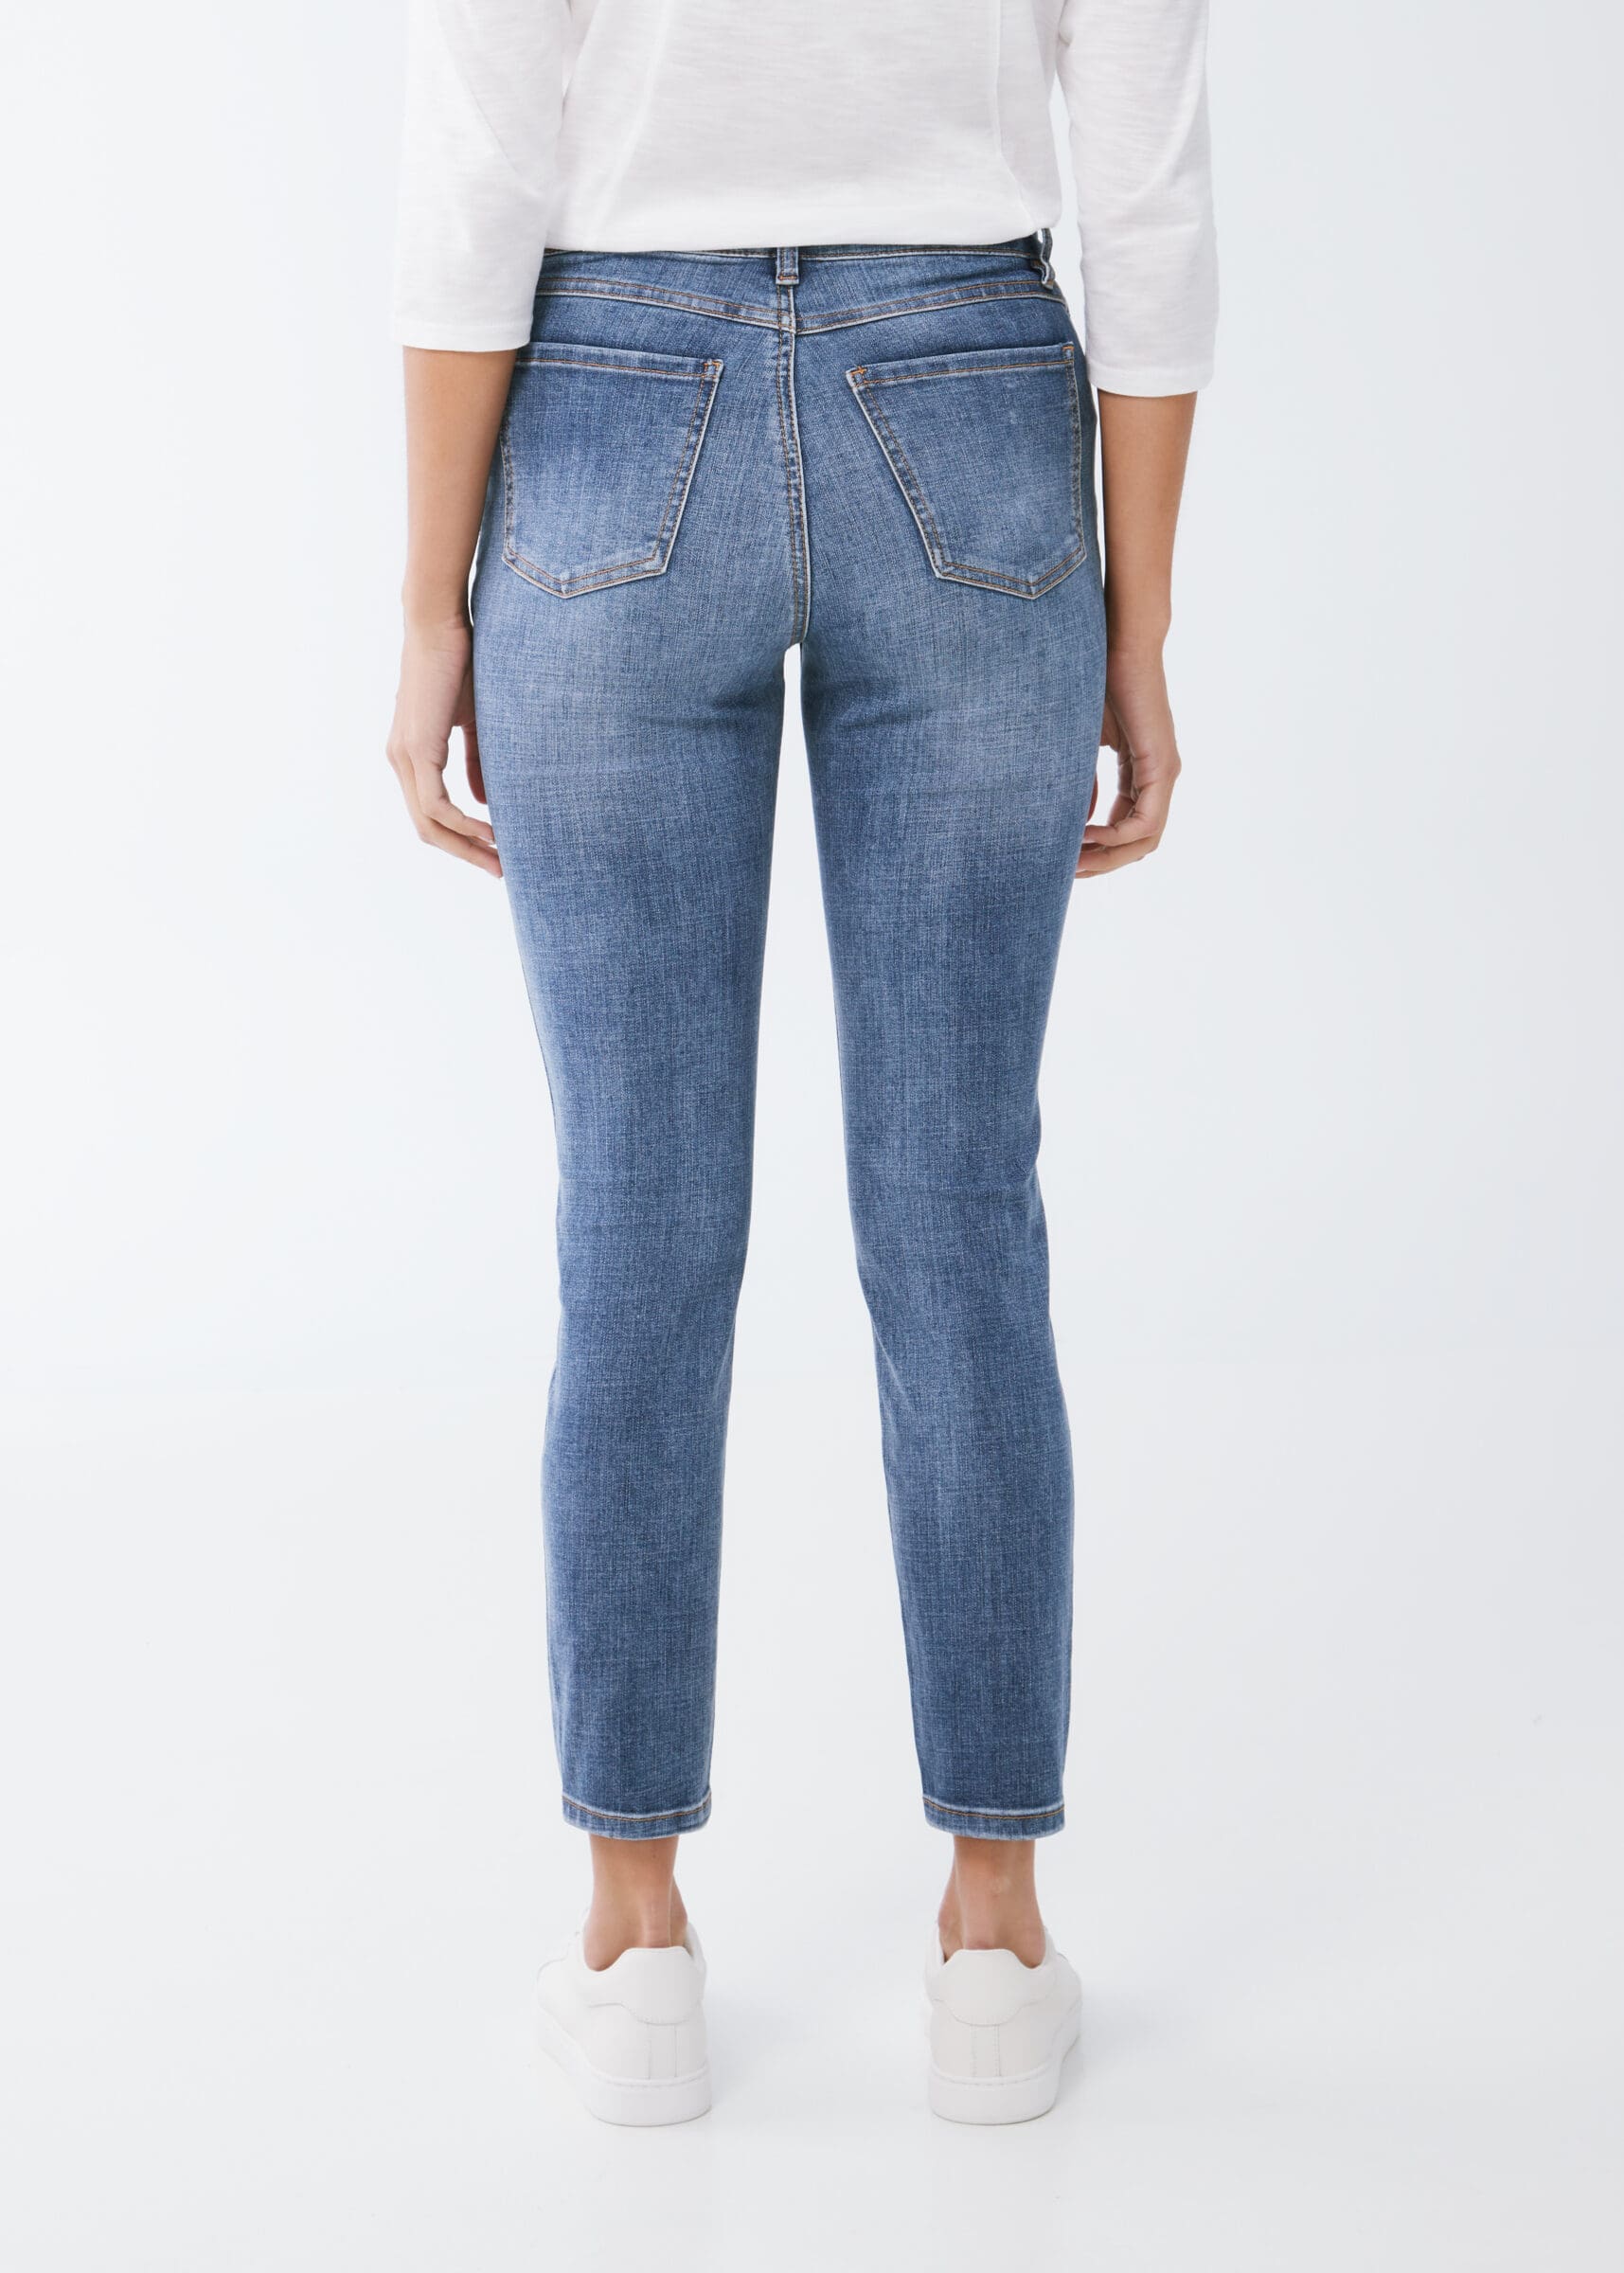 FDJ Crosshatch Olivia Slim Ankle - Medium Wash Clothing - Bottoms - Denim - Opening by French Dressing Jeans | Grace the Boutique